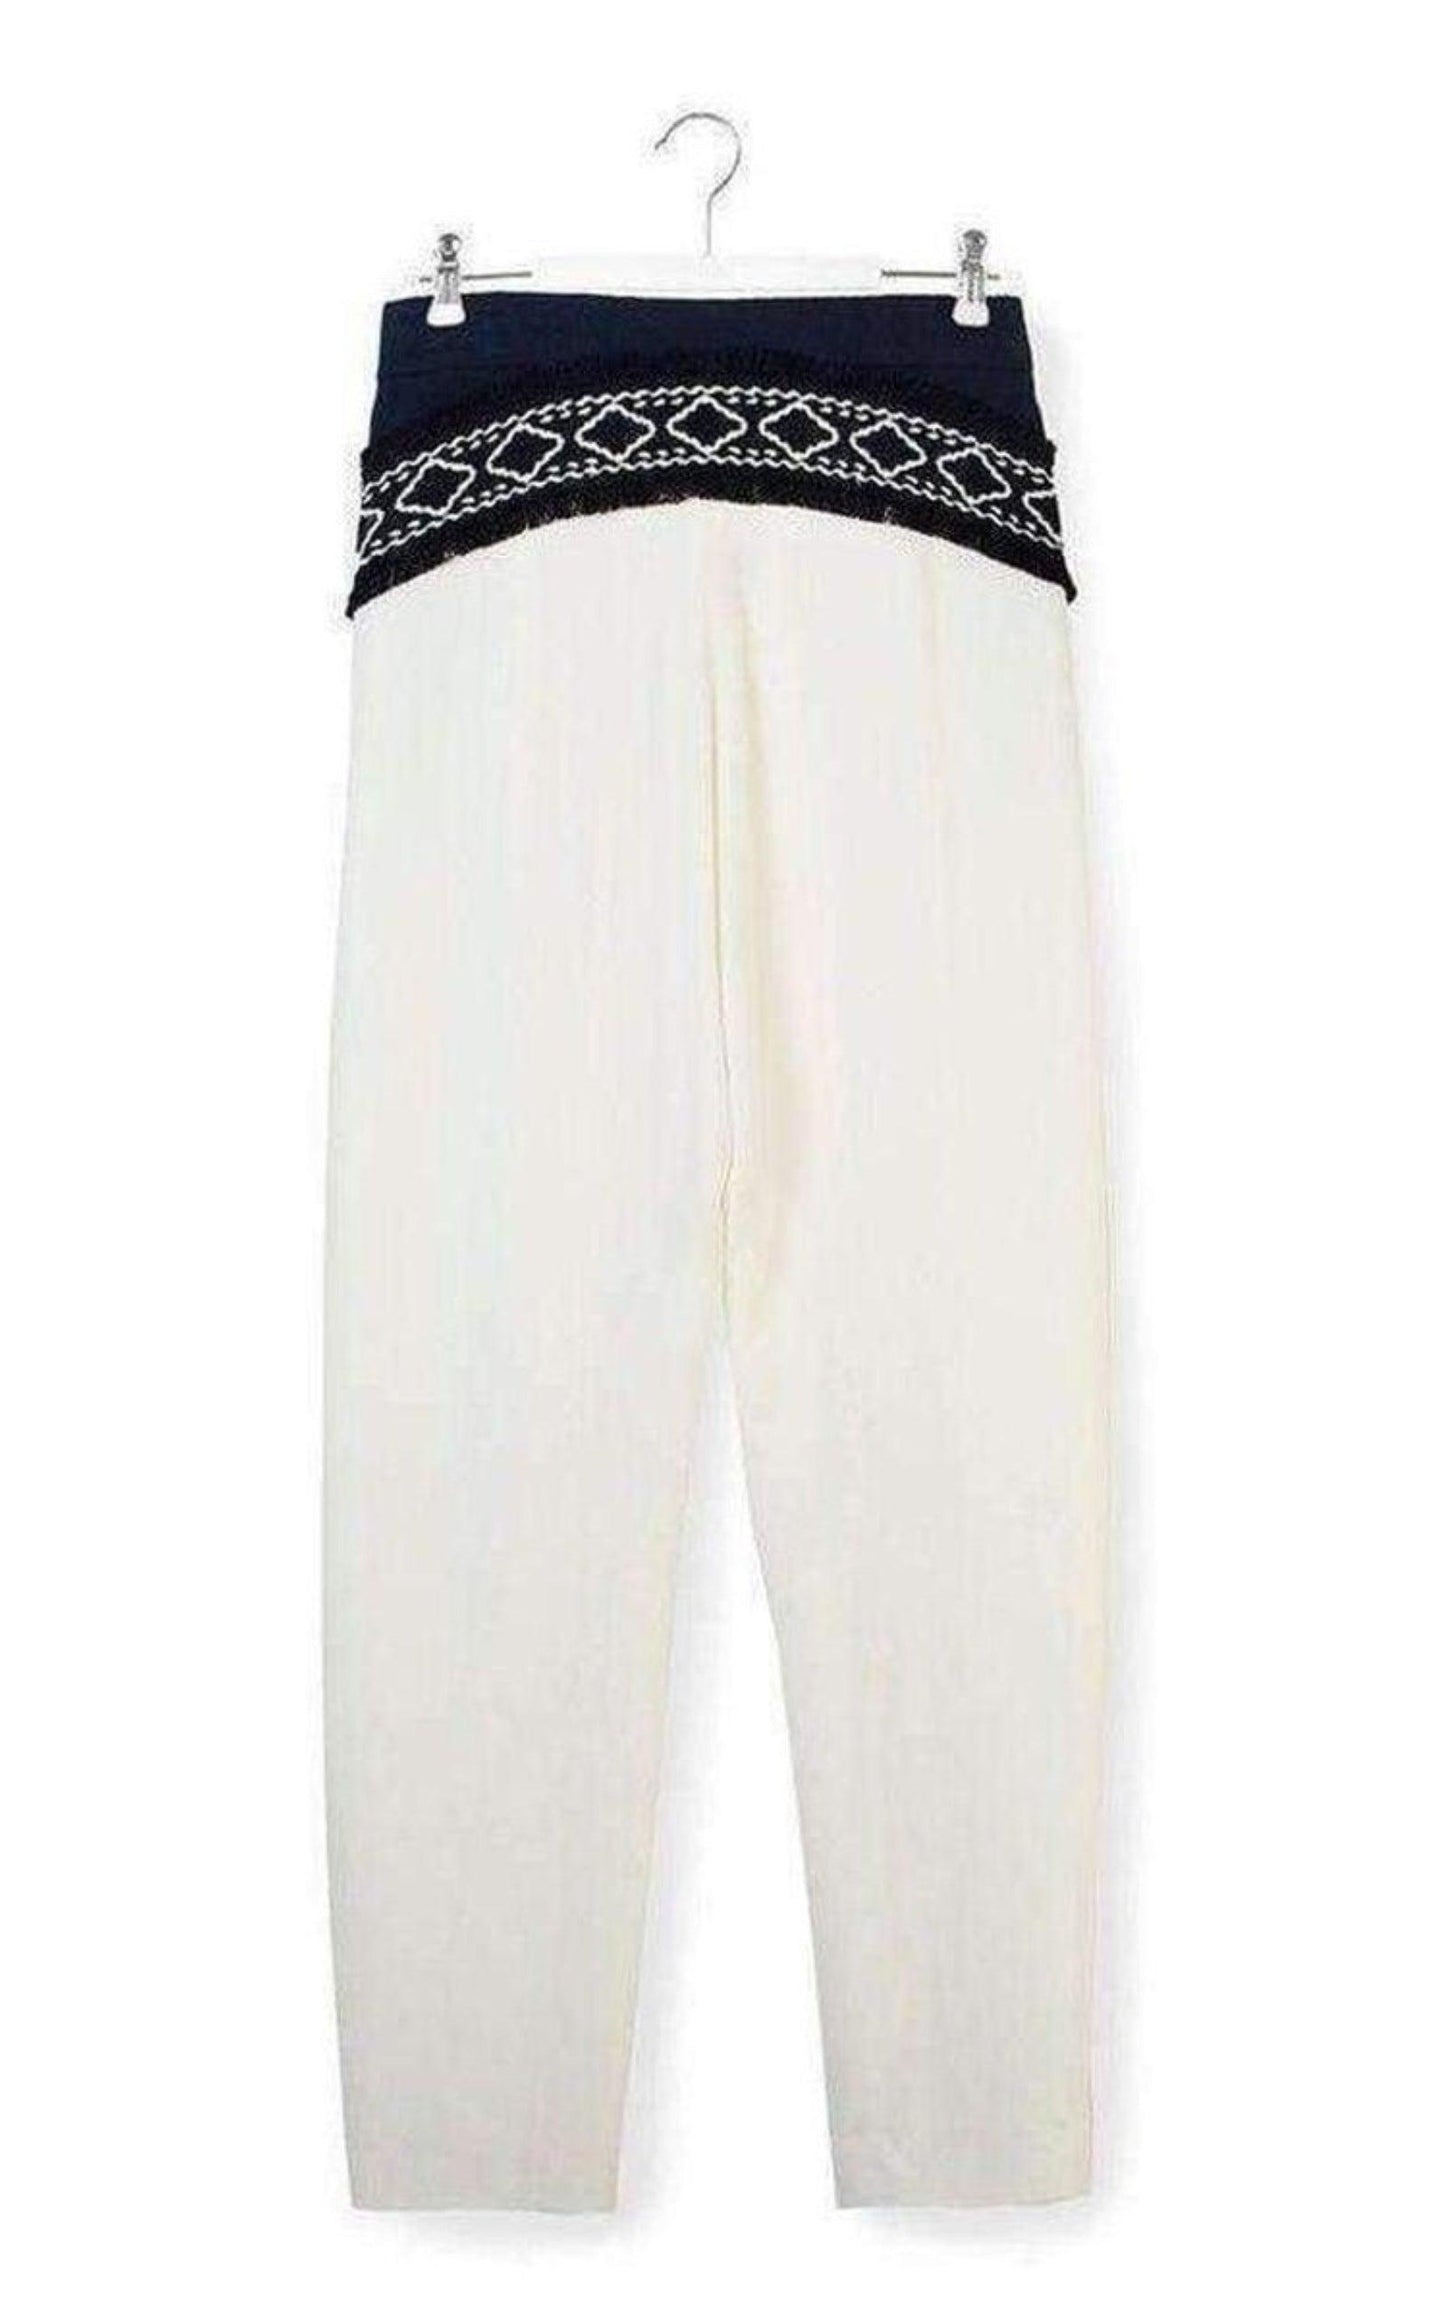  ChloeWhite Embroidered Cotton Pants - Runway Catalog